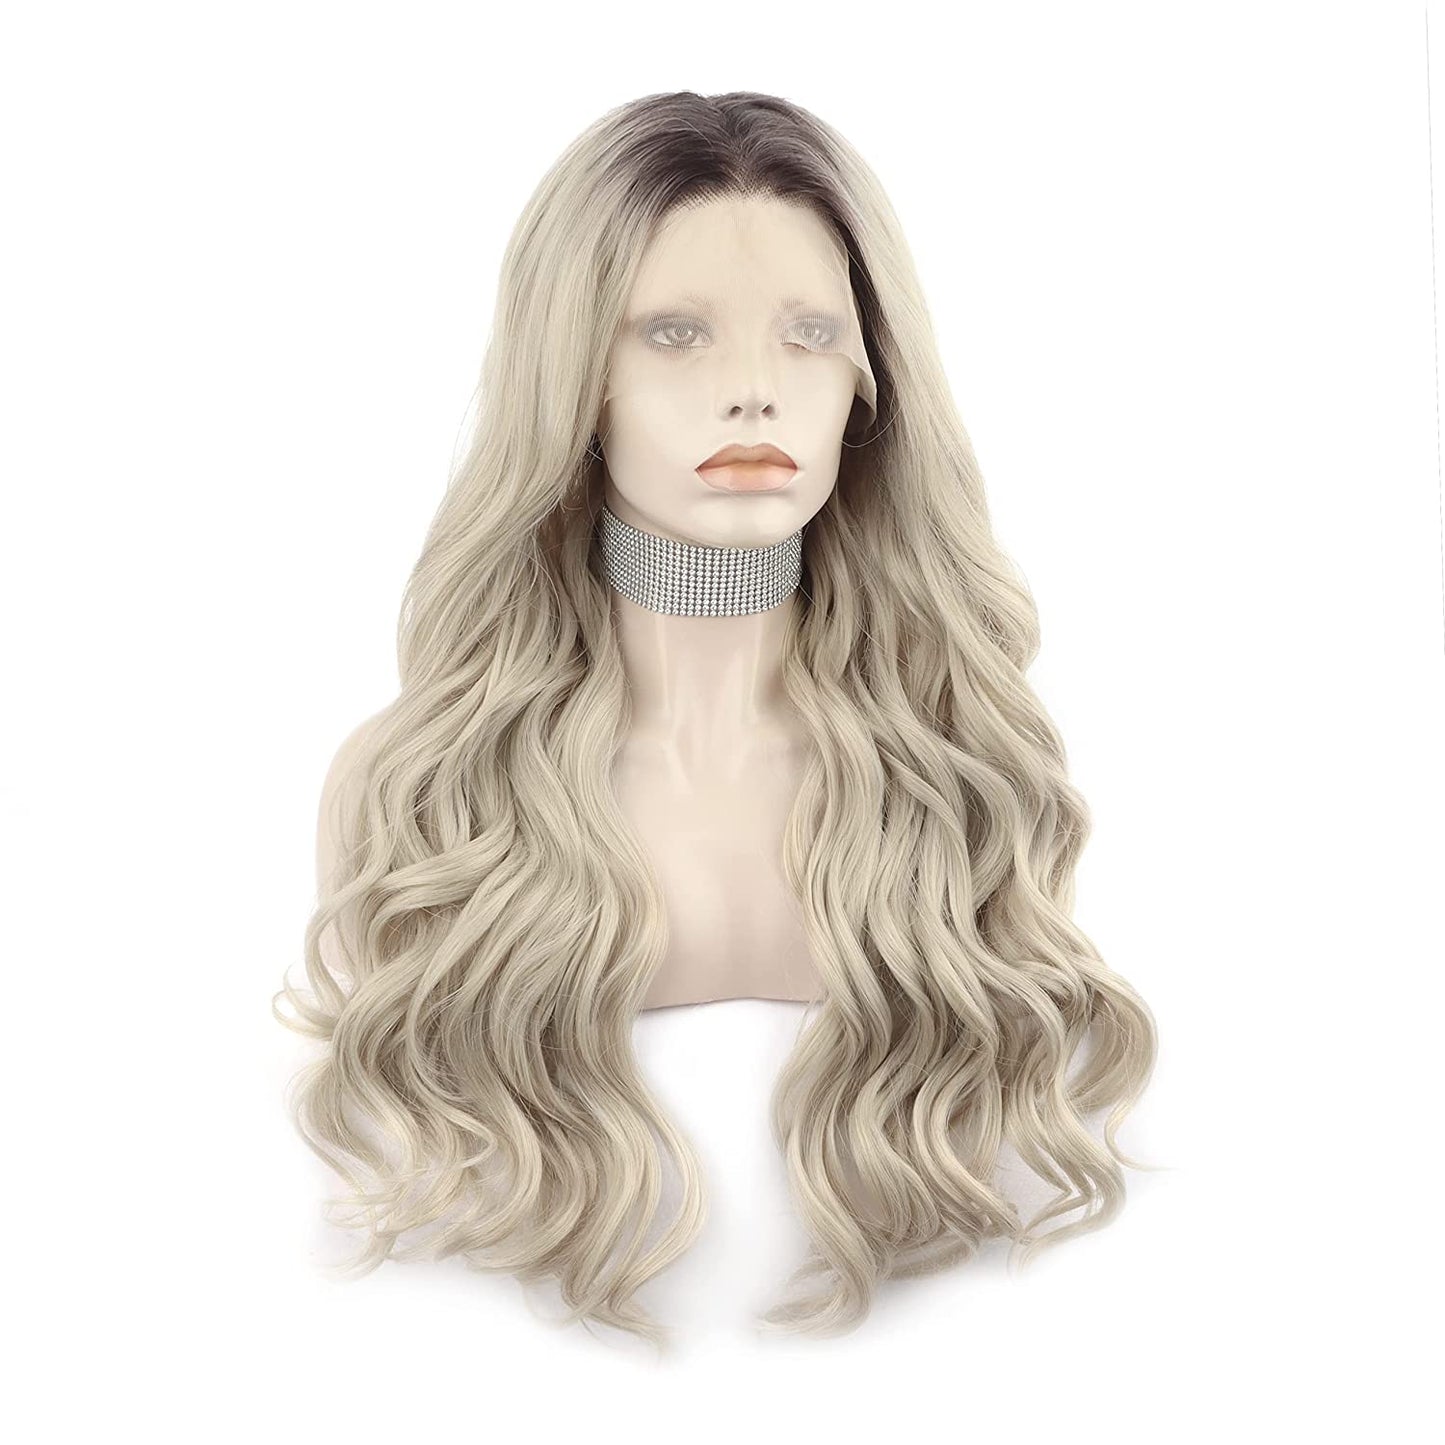 Synthetic Wig for Women blonde,wigs costumes wigs ash blonde hair brown hair blonde highlights ash blonde wig honey blonde hair ash blonde wigs ashy blonde hair blonde brown hair long blonde hair,ash Blonde Lace Front Wig